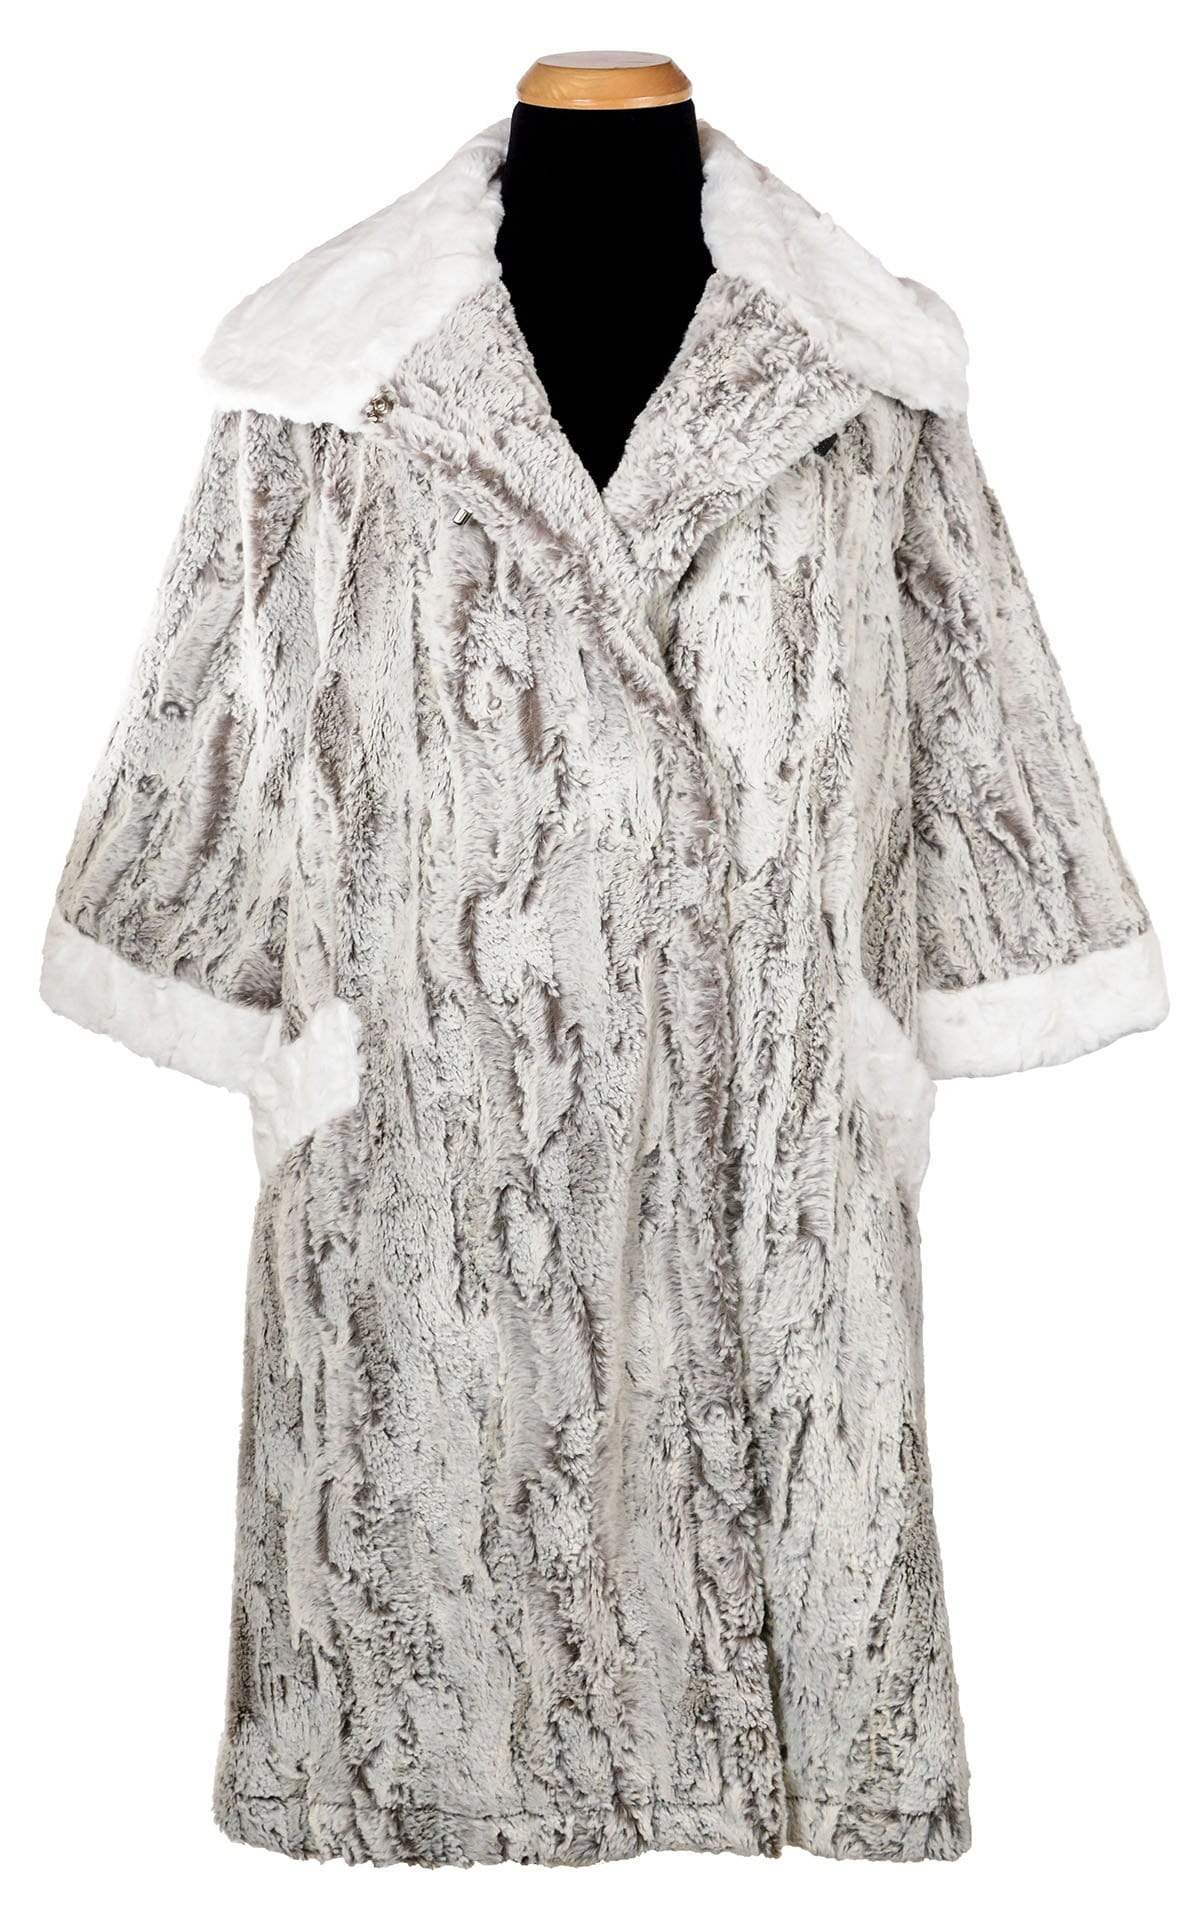 Crawford Coat - Luxury Faux Fur in Khaki with Cuddly Fur in Ivory (One Large Left!)